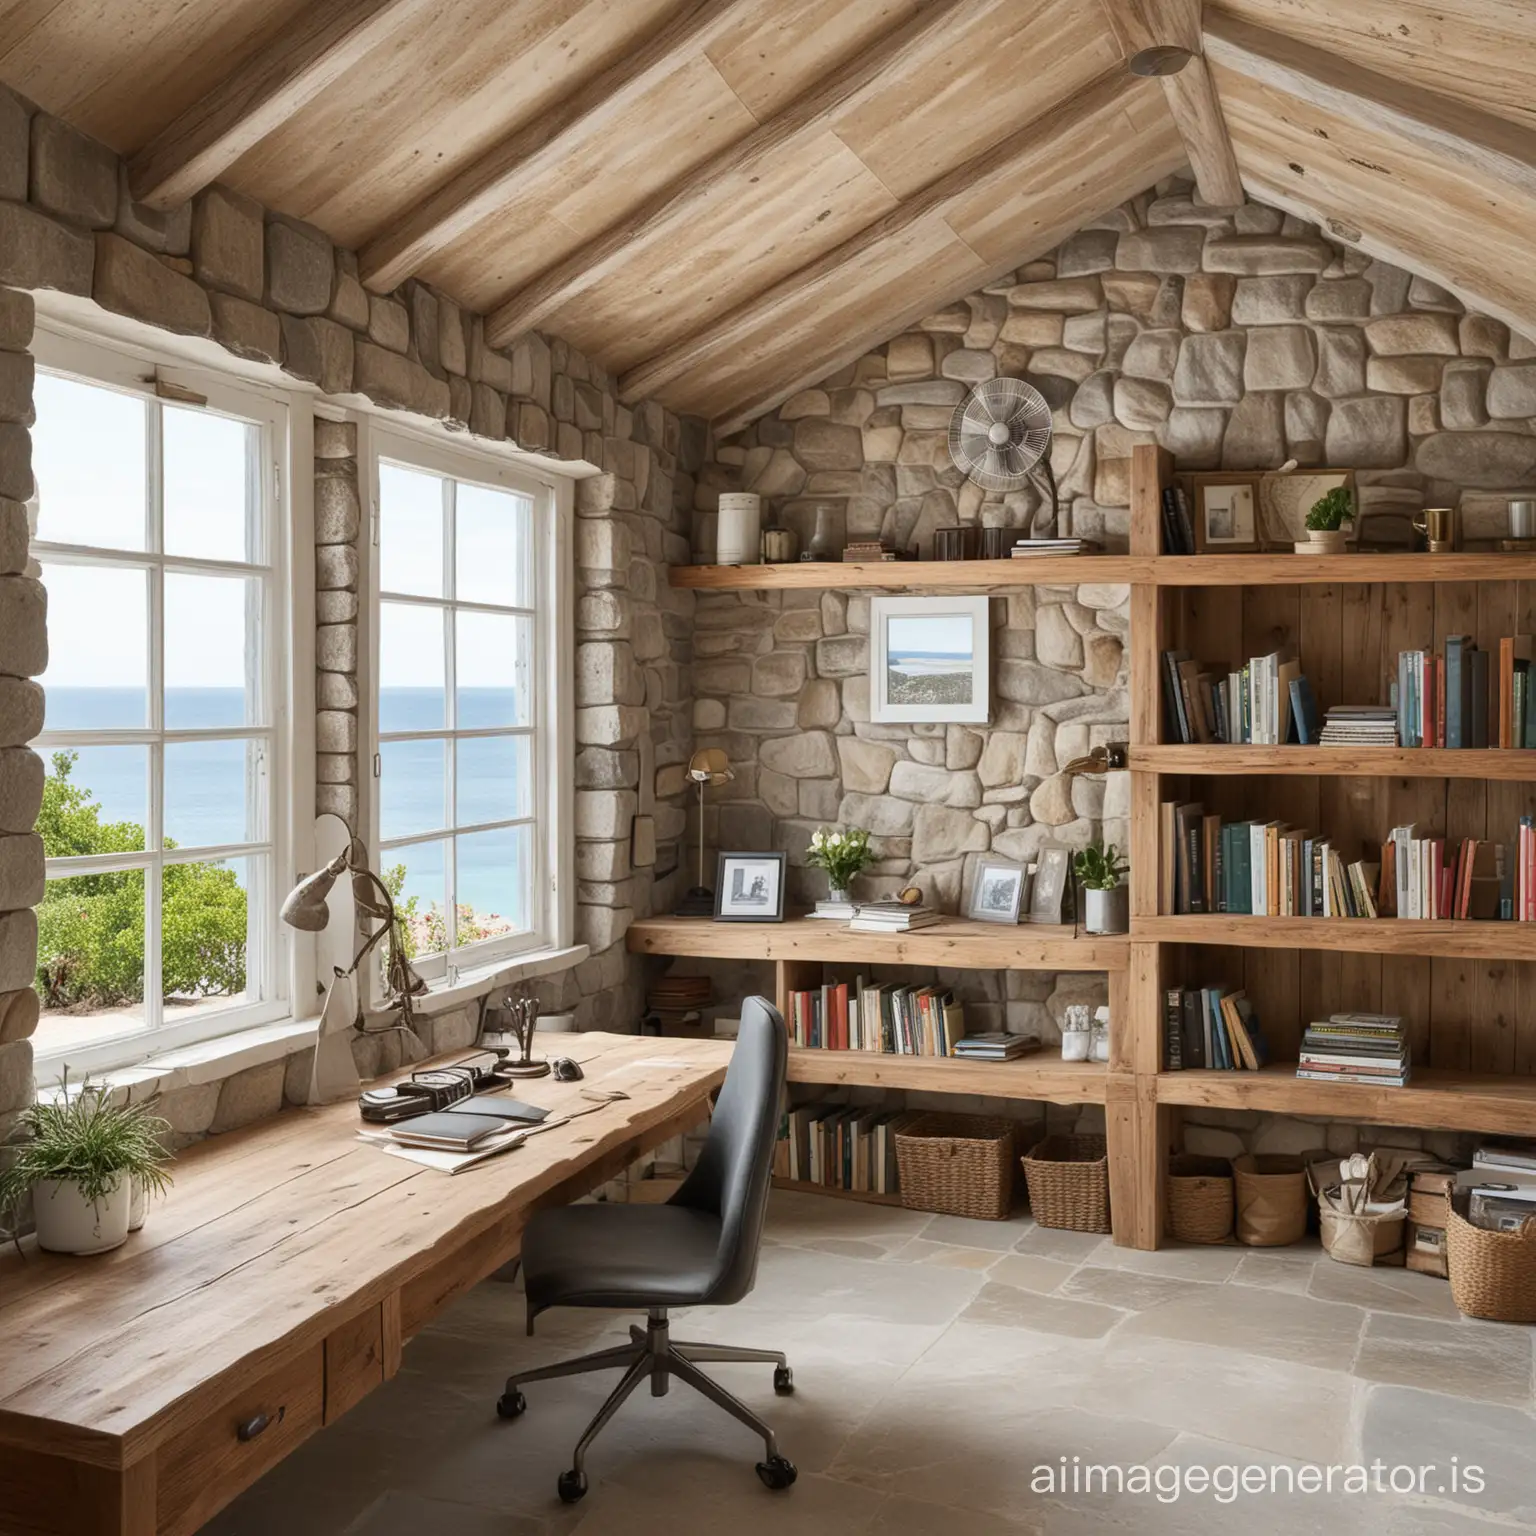 Rustic 160 square foot office in a stone sea cottage with a very small long window along one white wall looking out towards the sea, high slanted wood ceiling with fan, bookshelves along the back wall